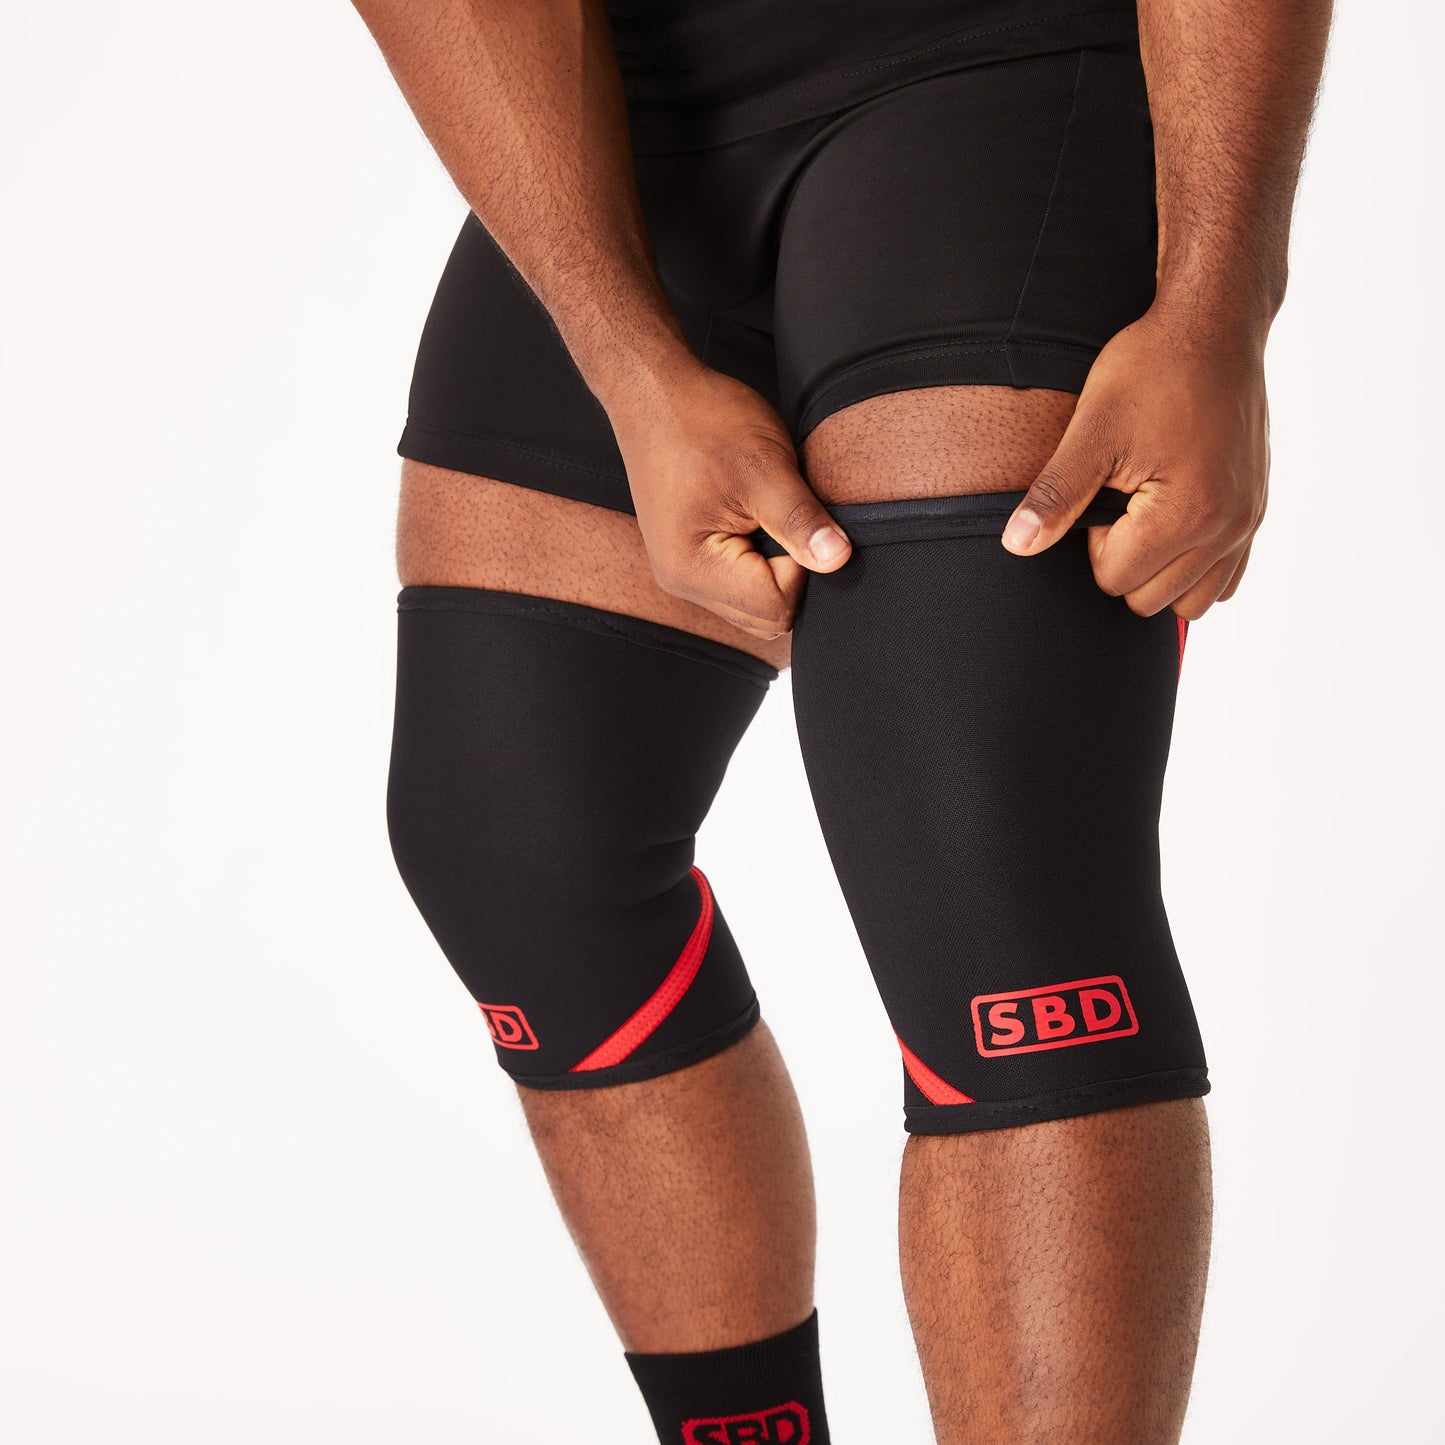 How to get the most out of your SBD Knee Sleeves